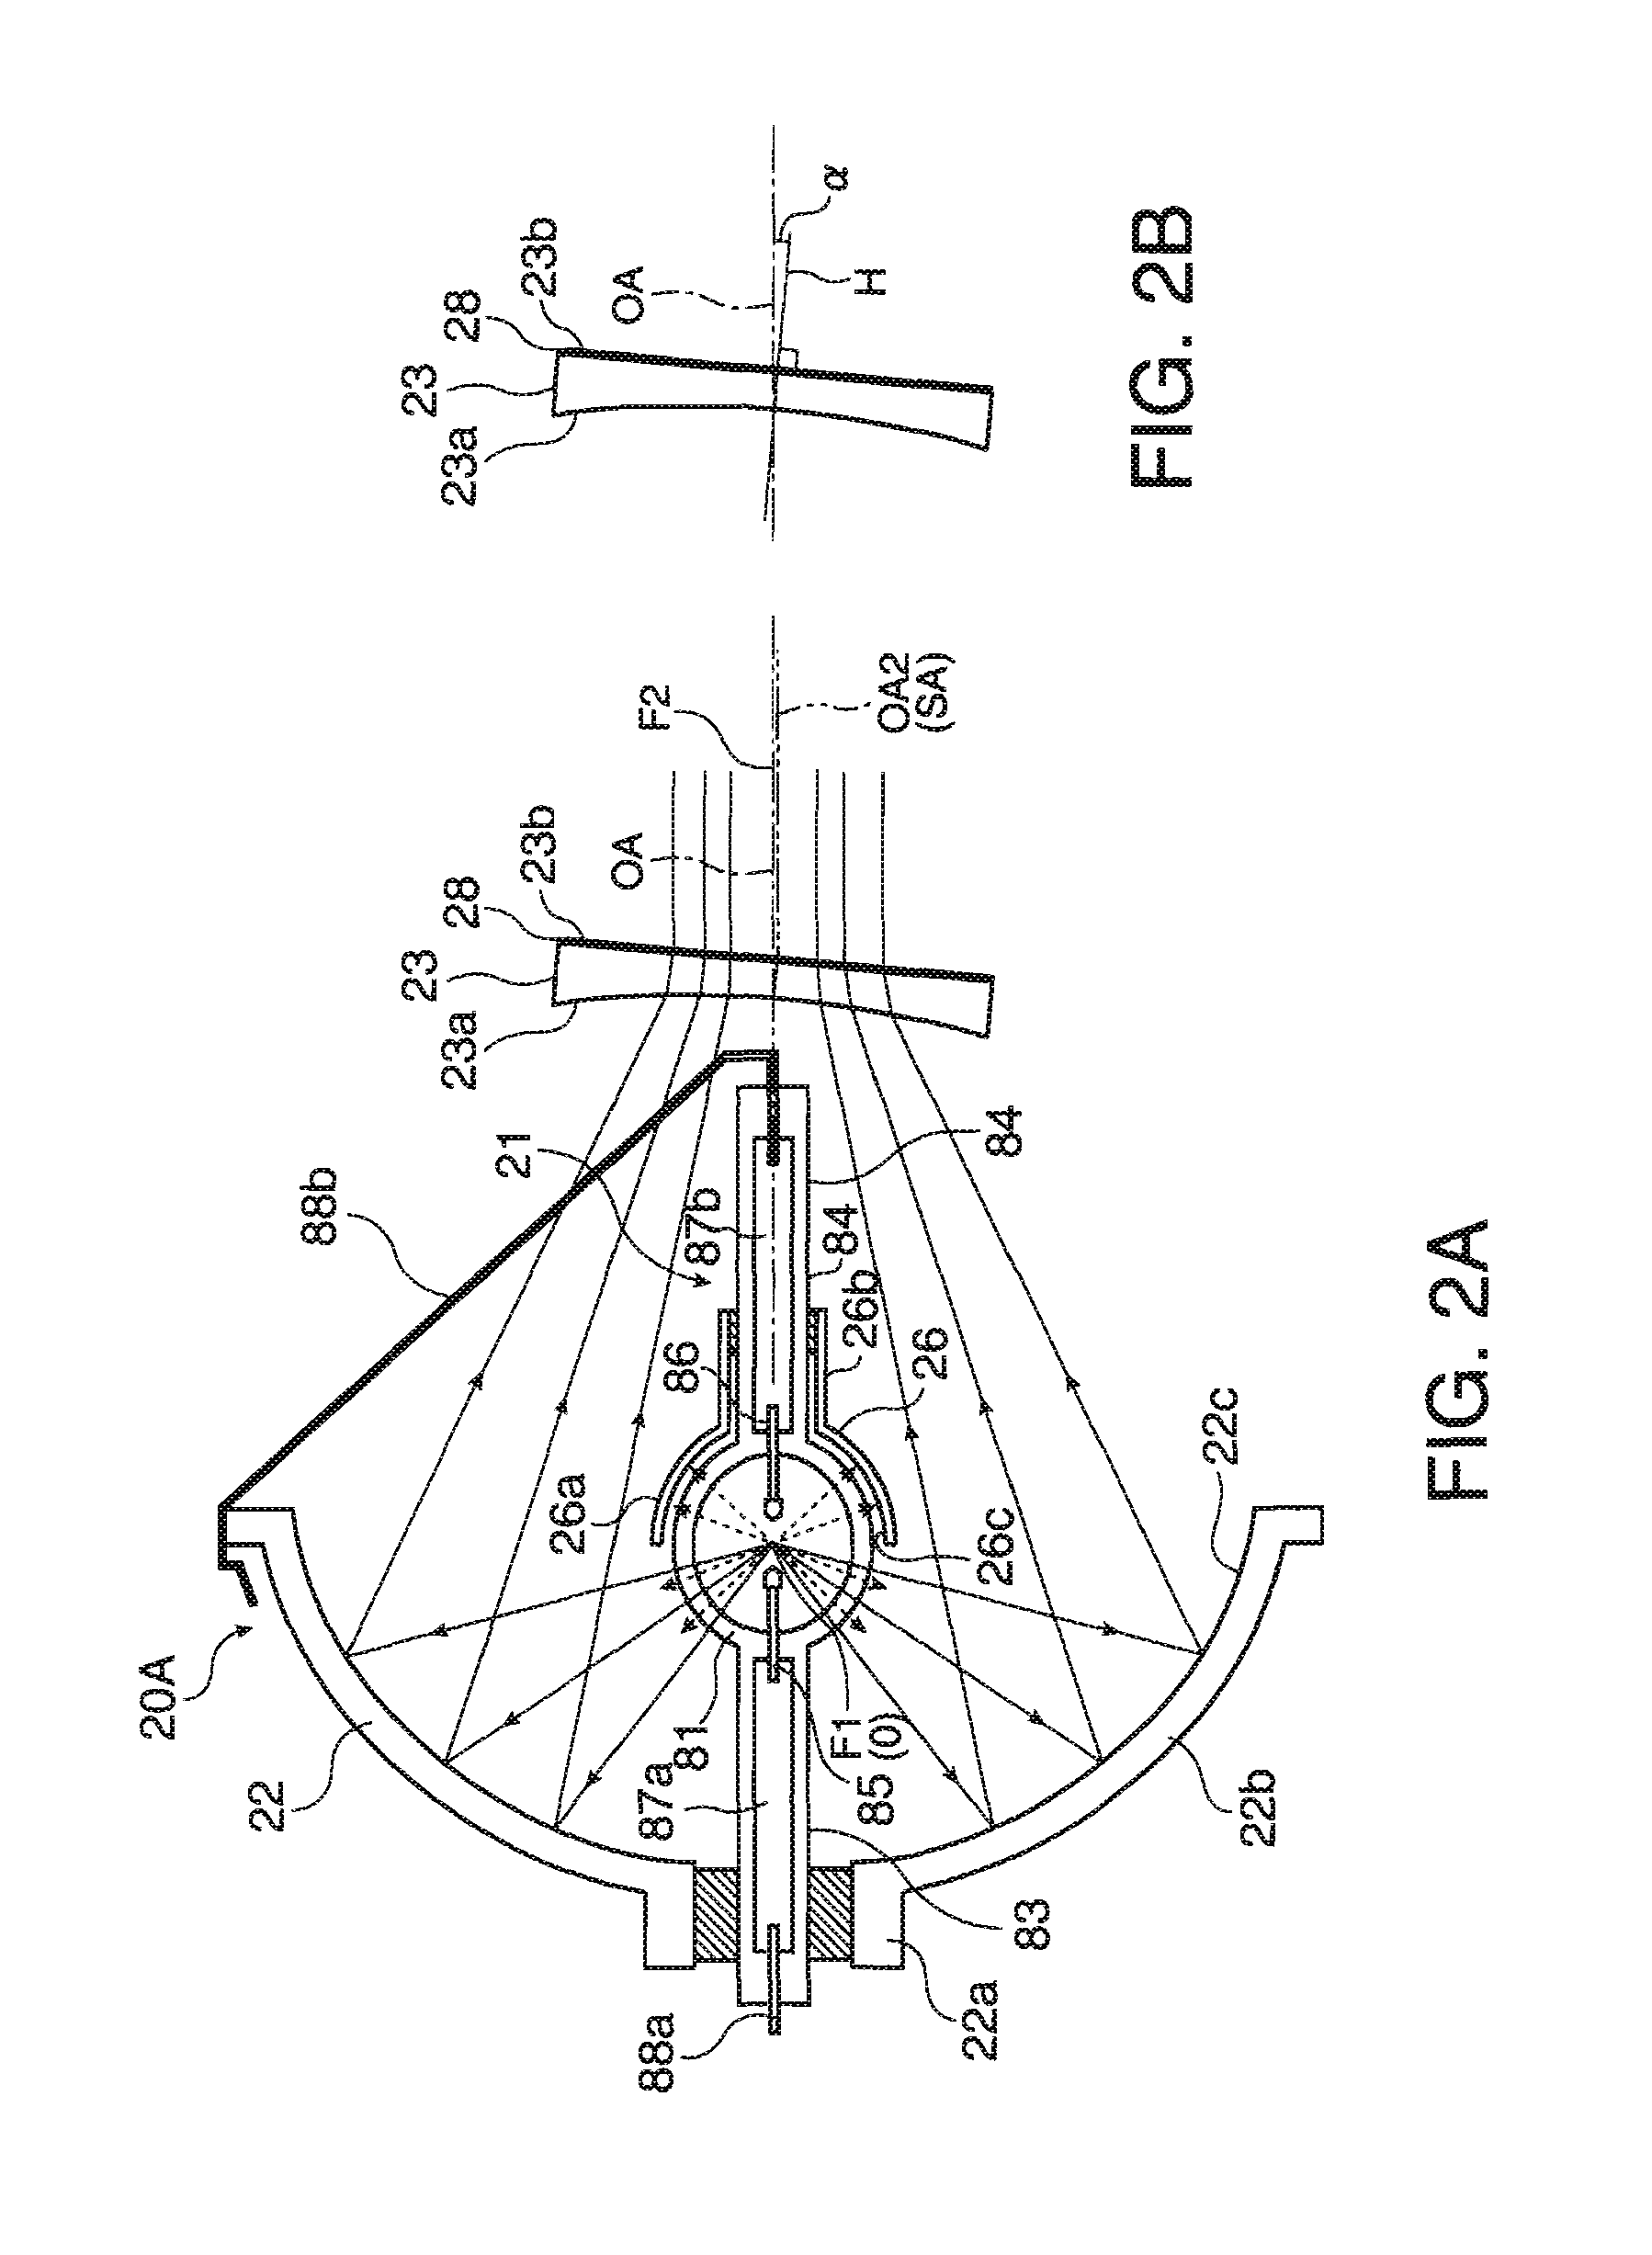 Illuminating device and projector